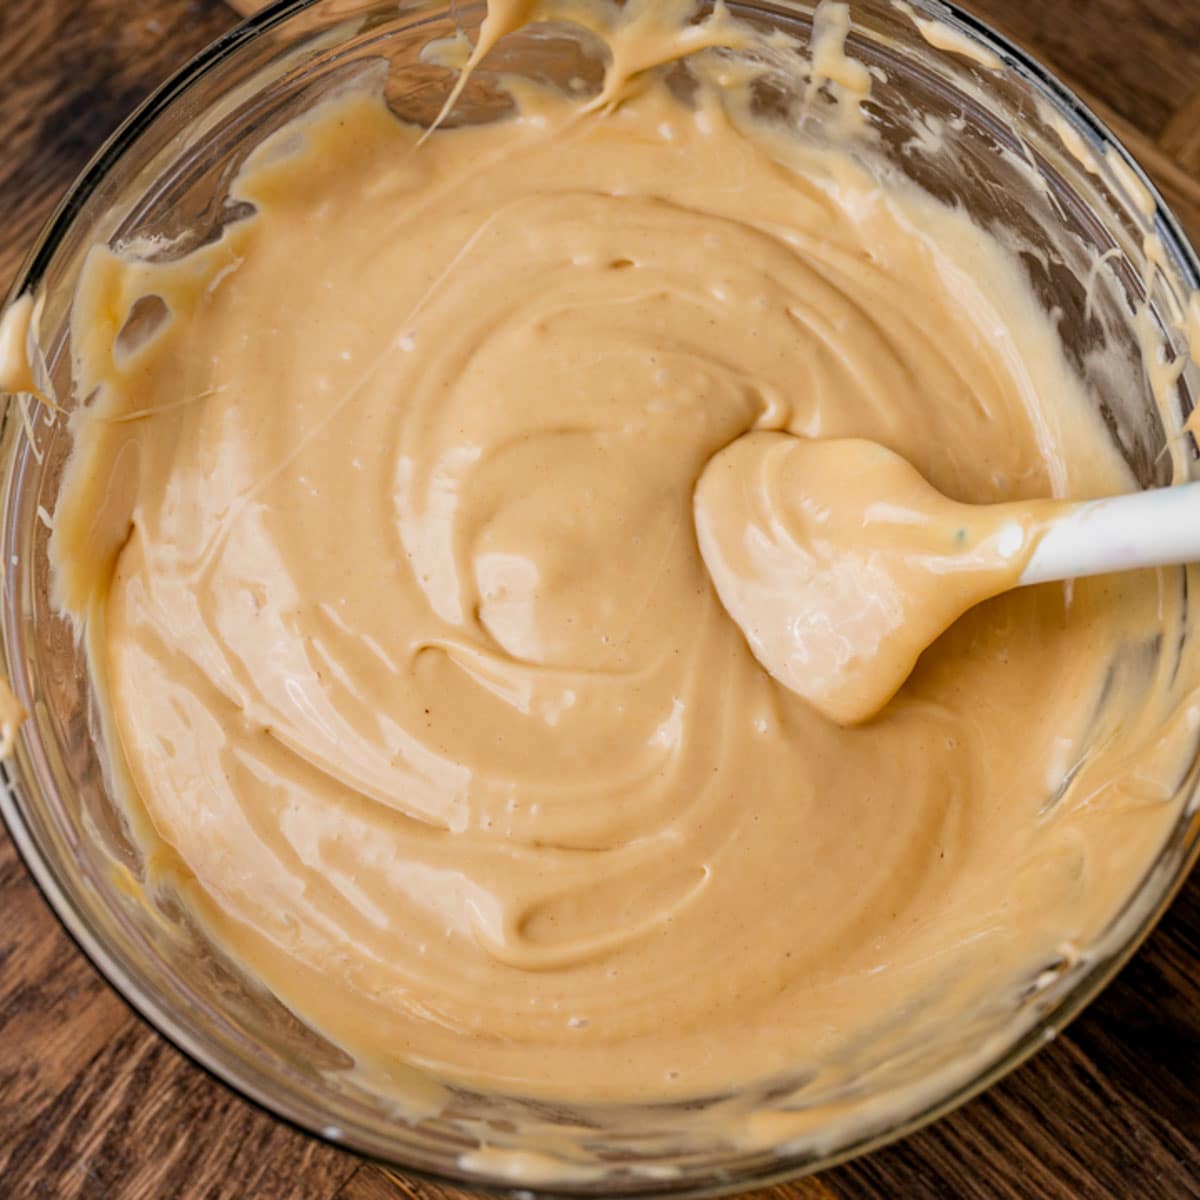 amish peanut butter spread mixture in a bowl